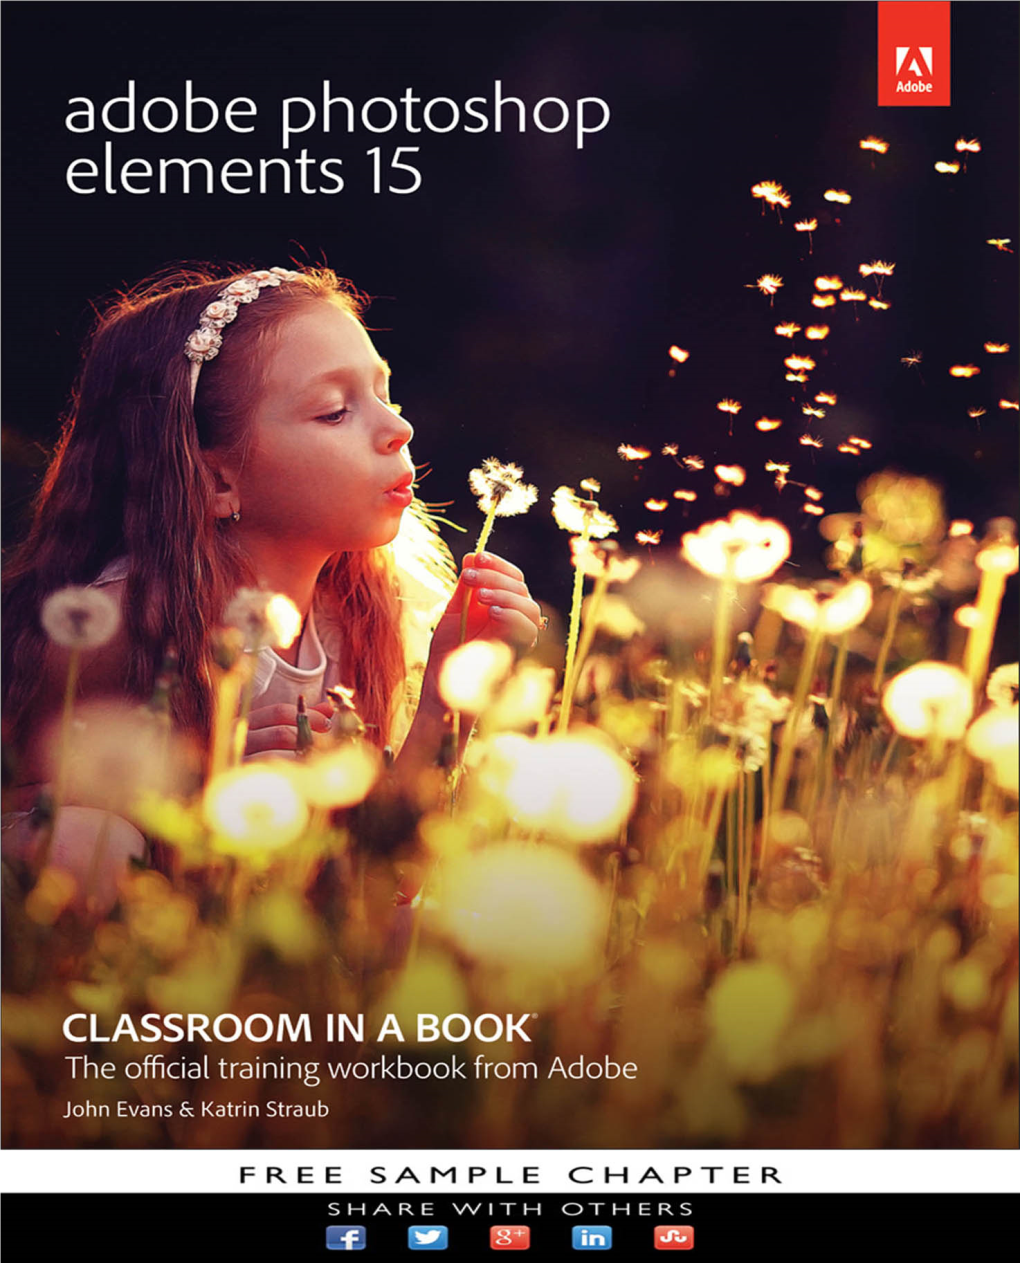 Adobe Photoshop Elements 15 Classroom in a Book®